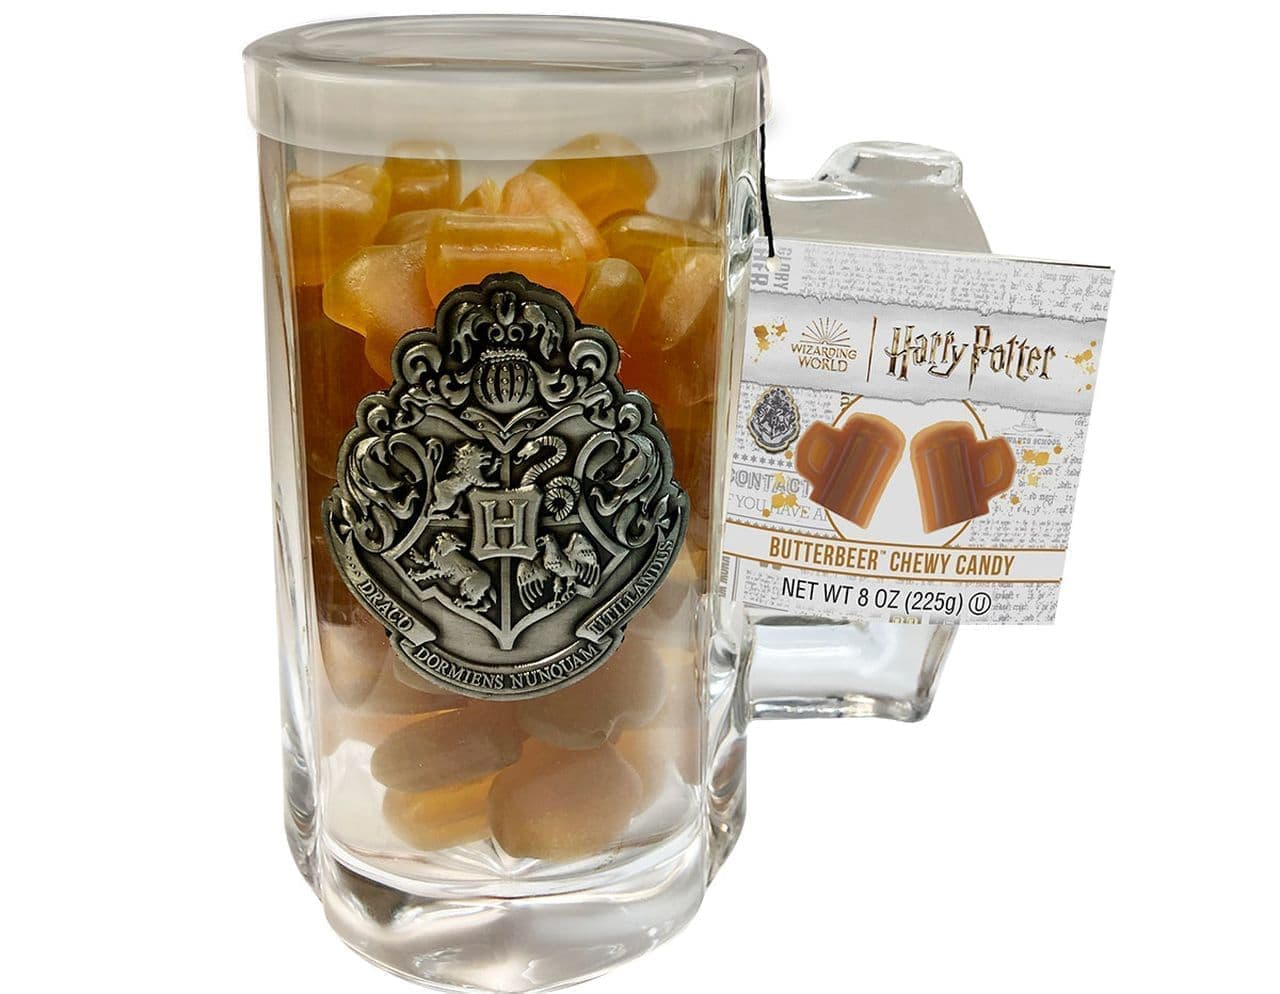 New Harry Potter-related products from Jelly Belly, a 100-flavor bean company 